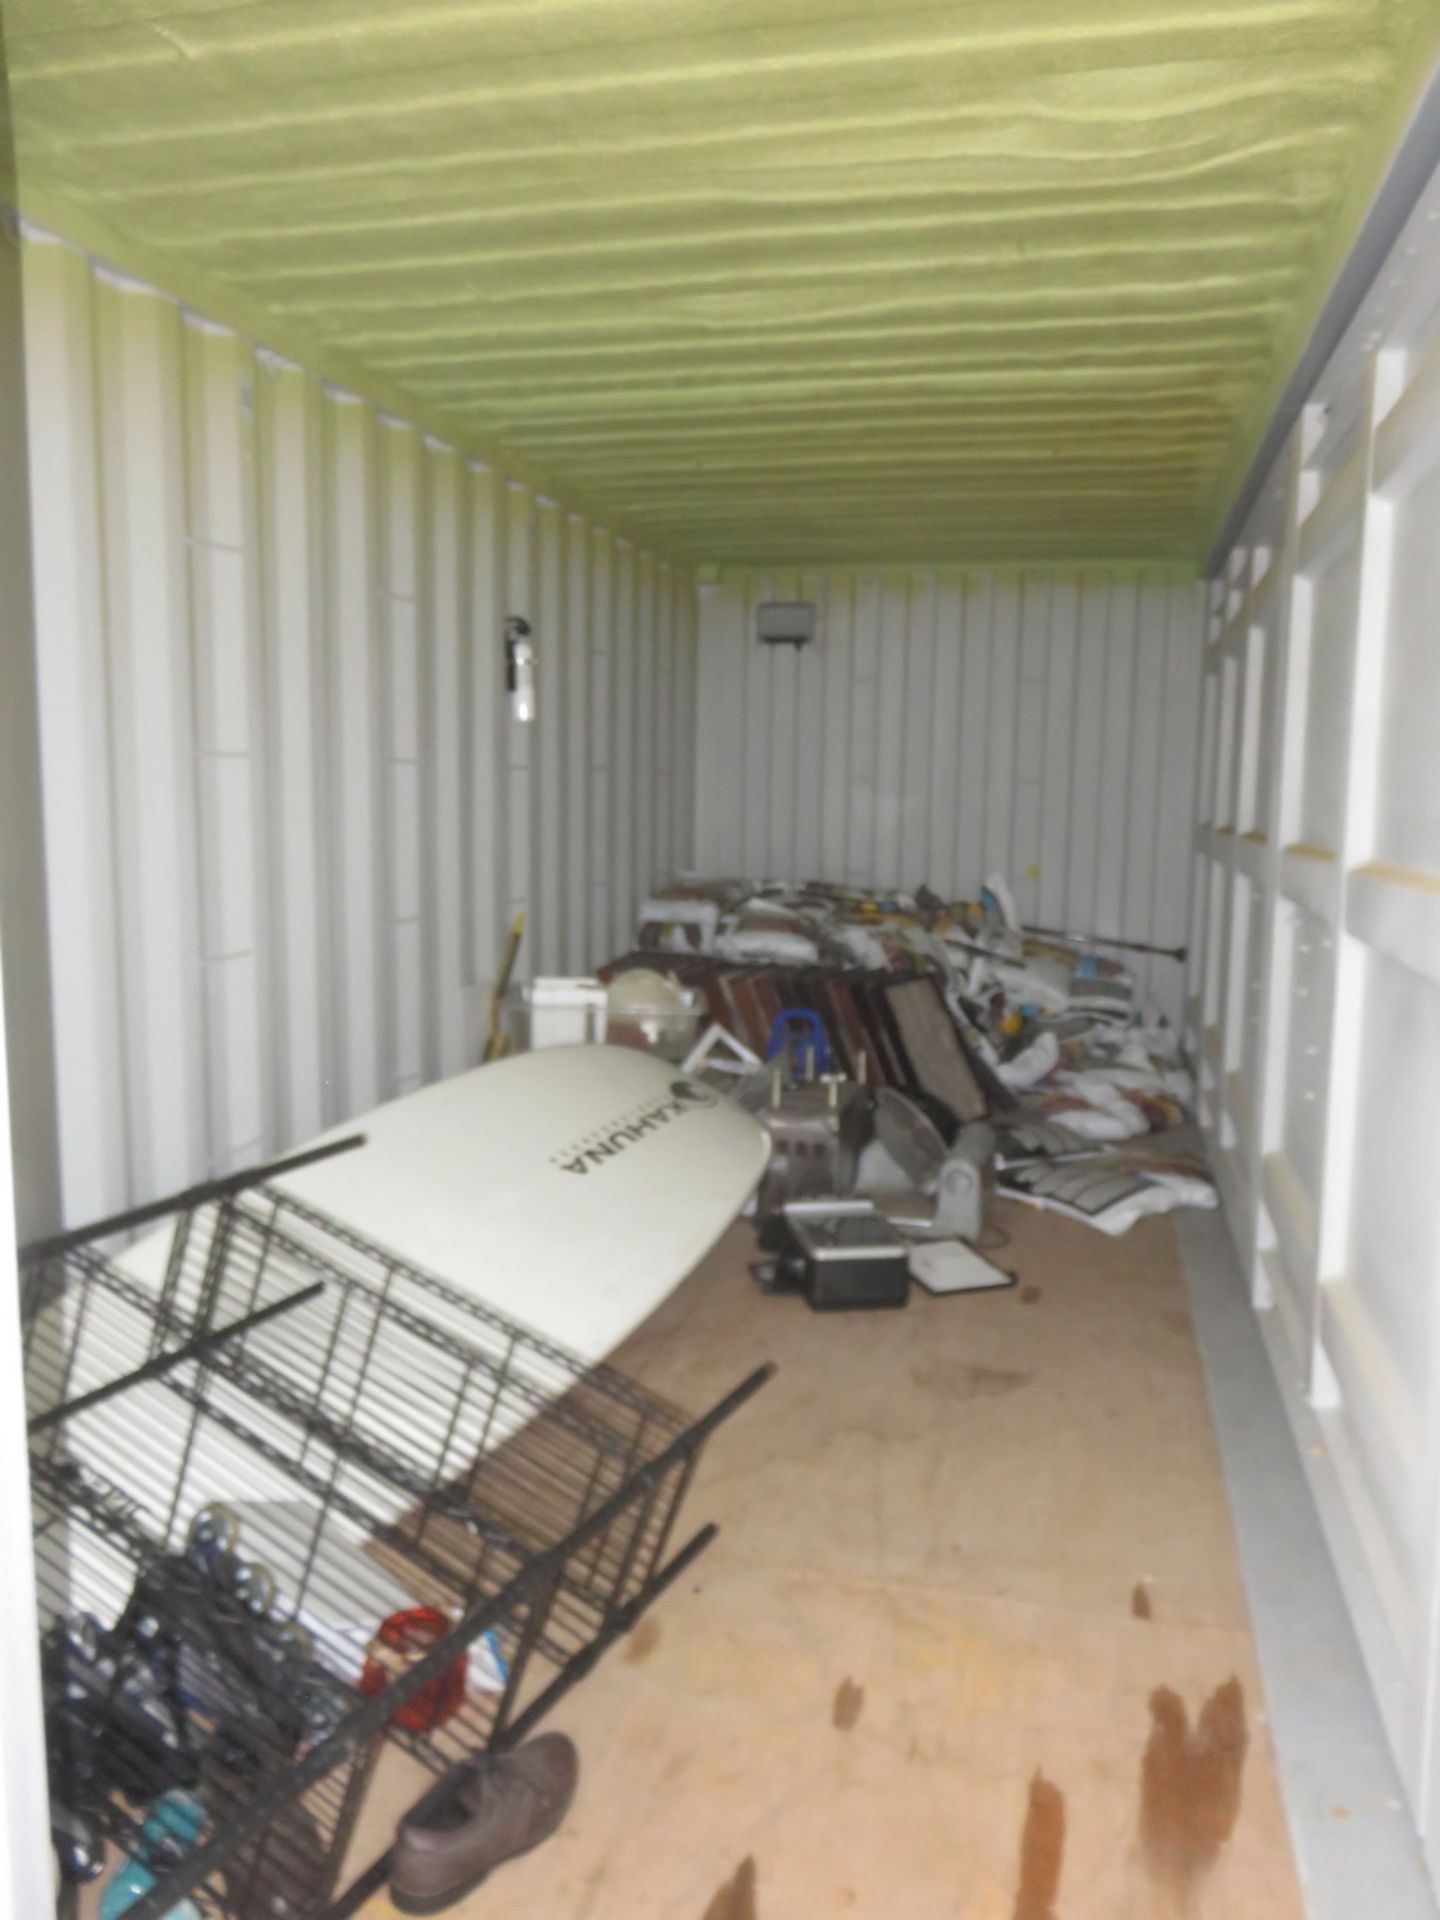 2016 GENERAL GREY STEEL 20' STORAGE CONTAINER (CONTAINER ONLY - NO CONTENTS) - Image 5 of 5